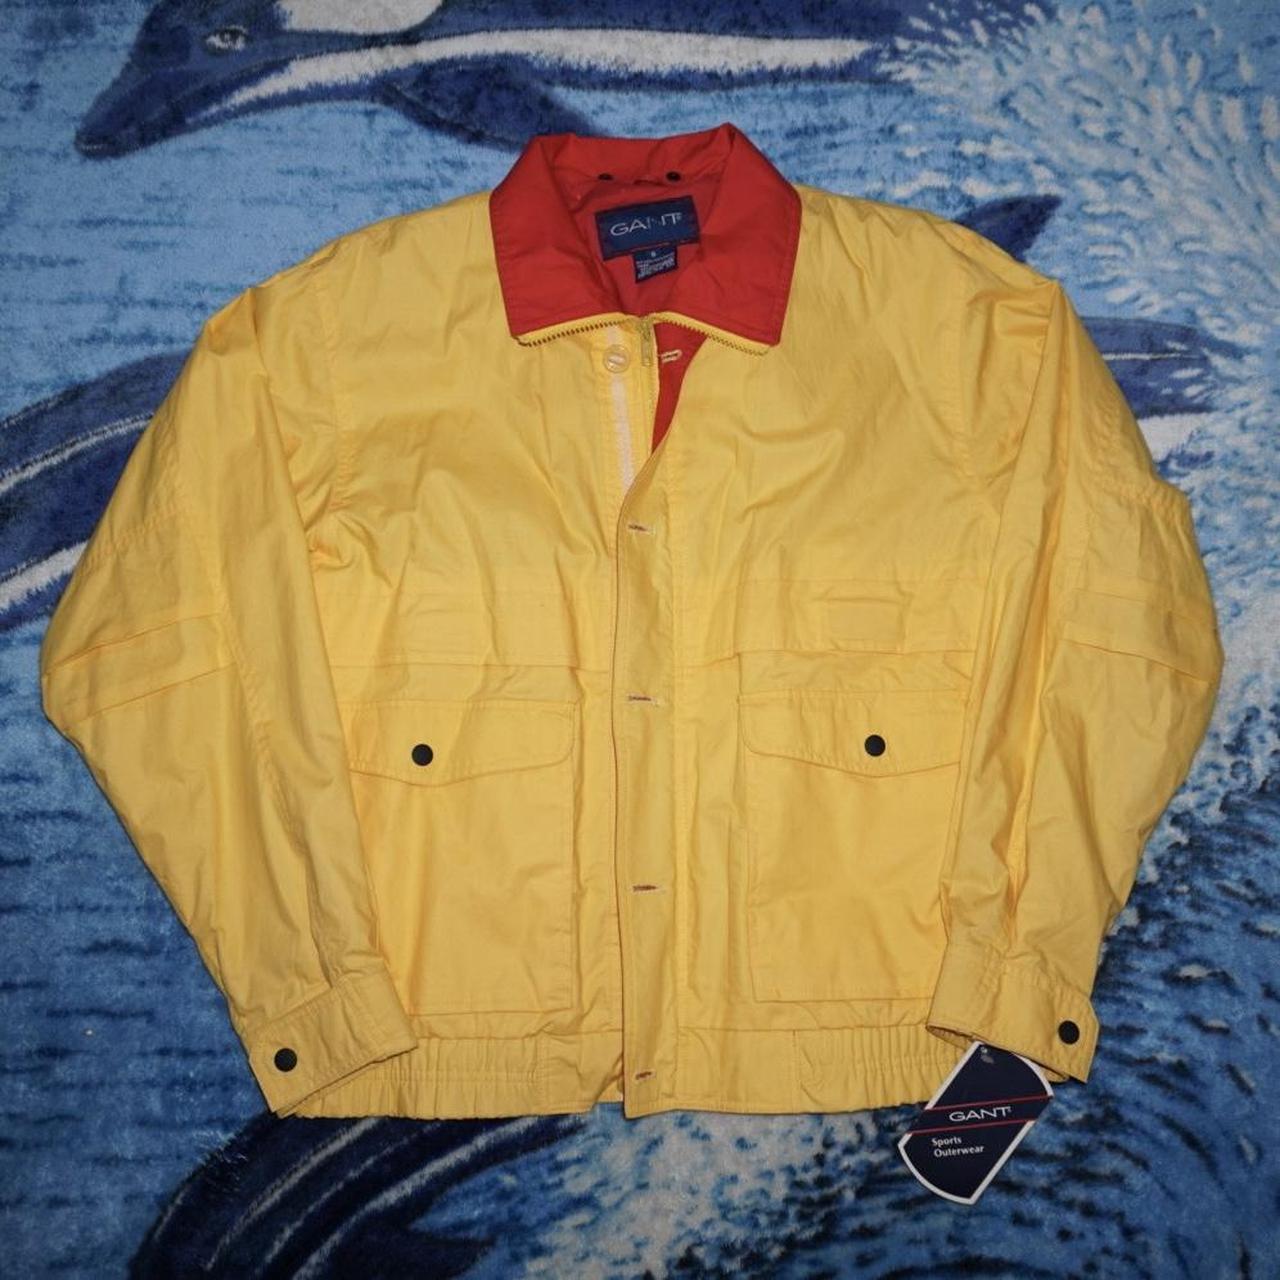 GANT Men's Yellow and Red Jacket